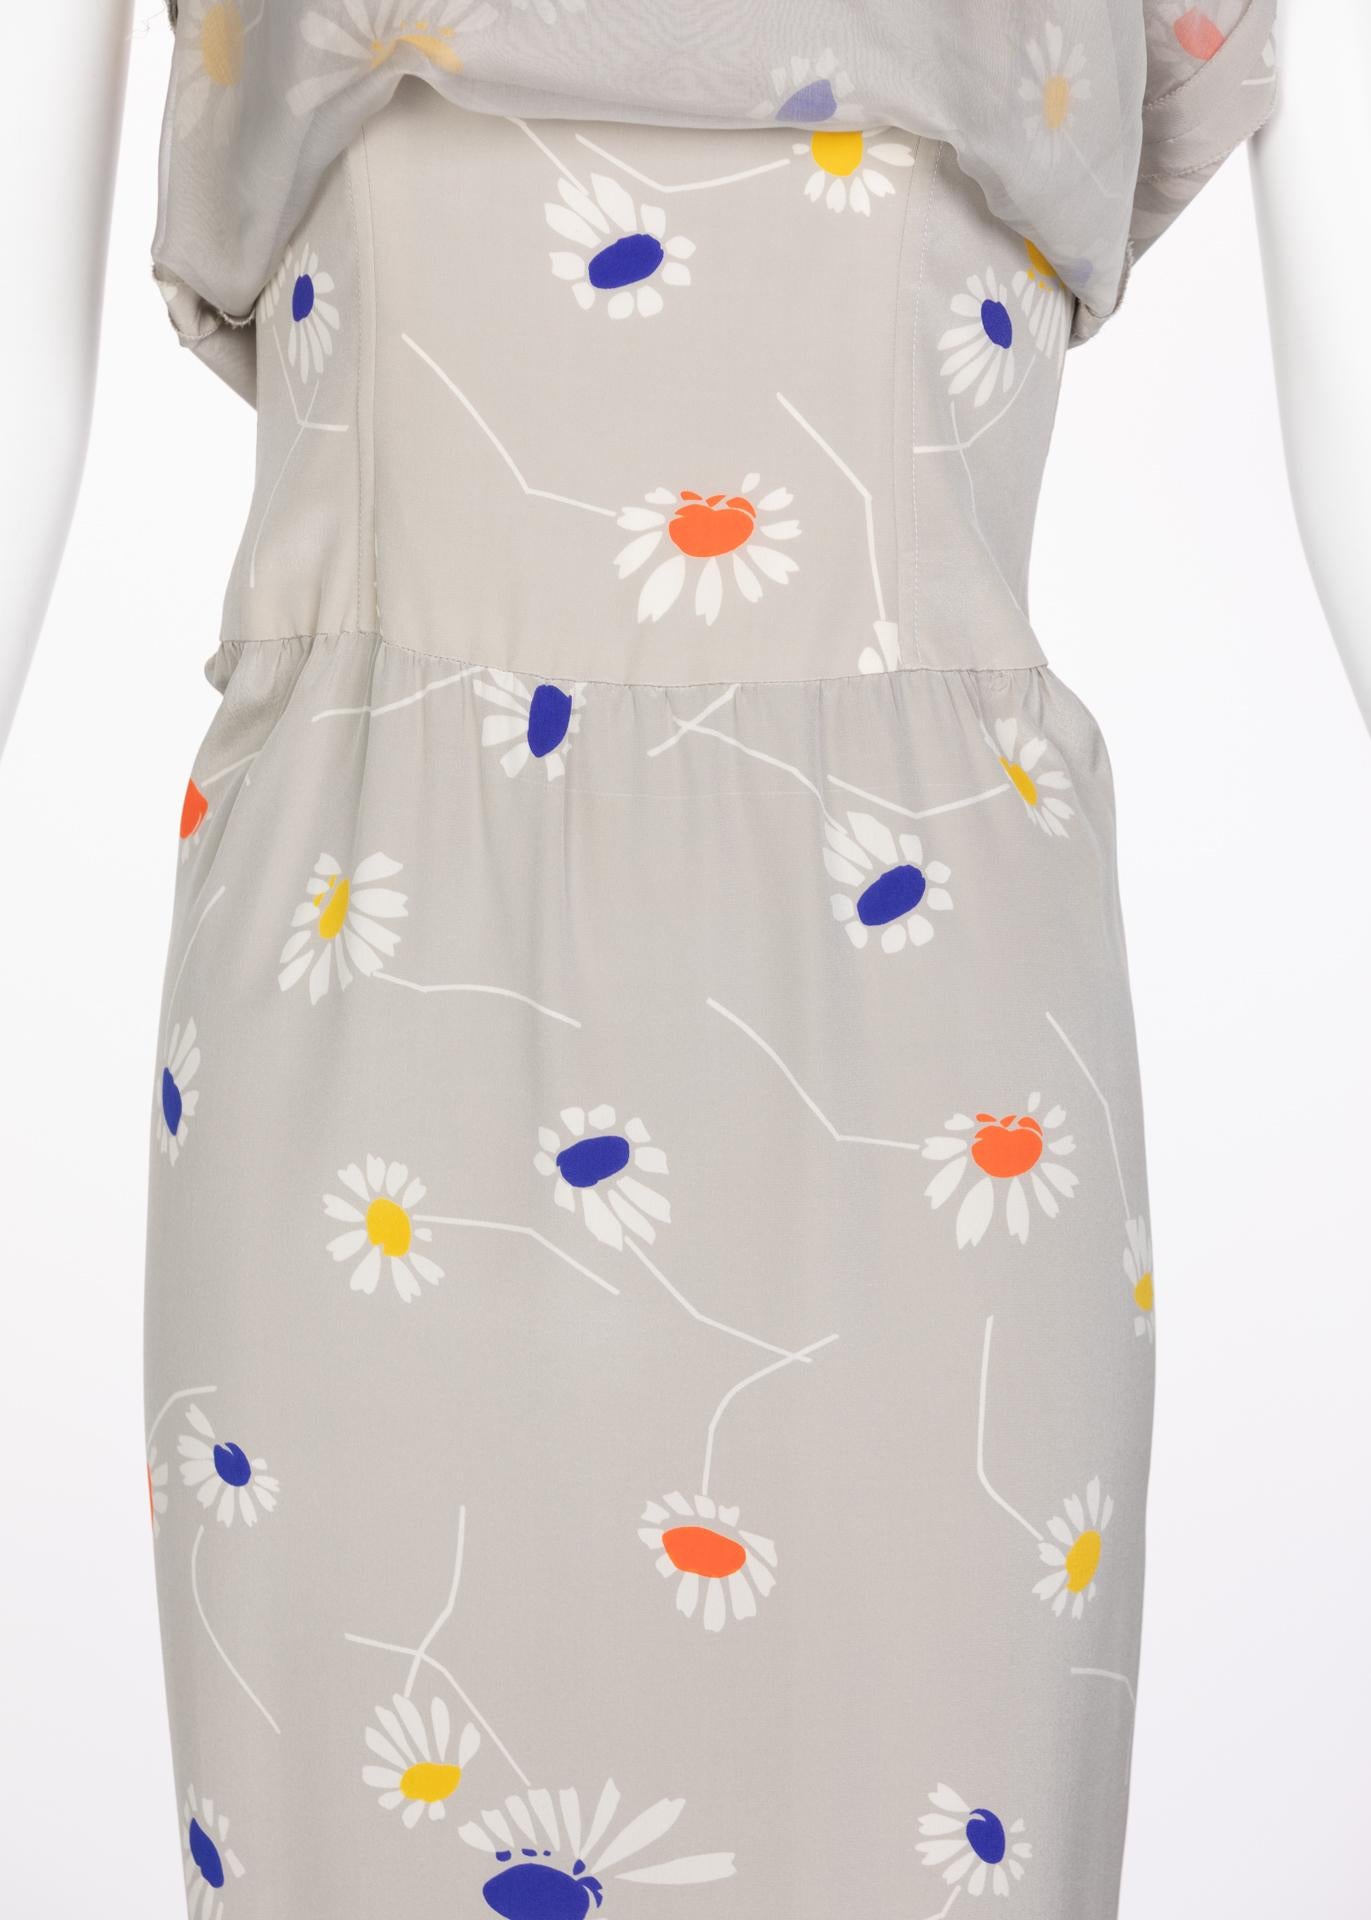 Women's or Men's Chloé by Karl Lagerfeld Grey Floral Silk Maxi Dress, 1980s For Sale